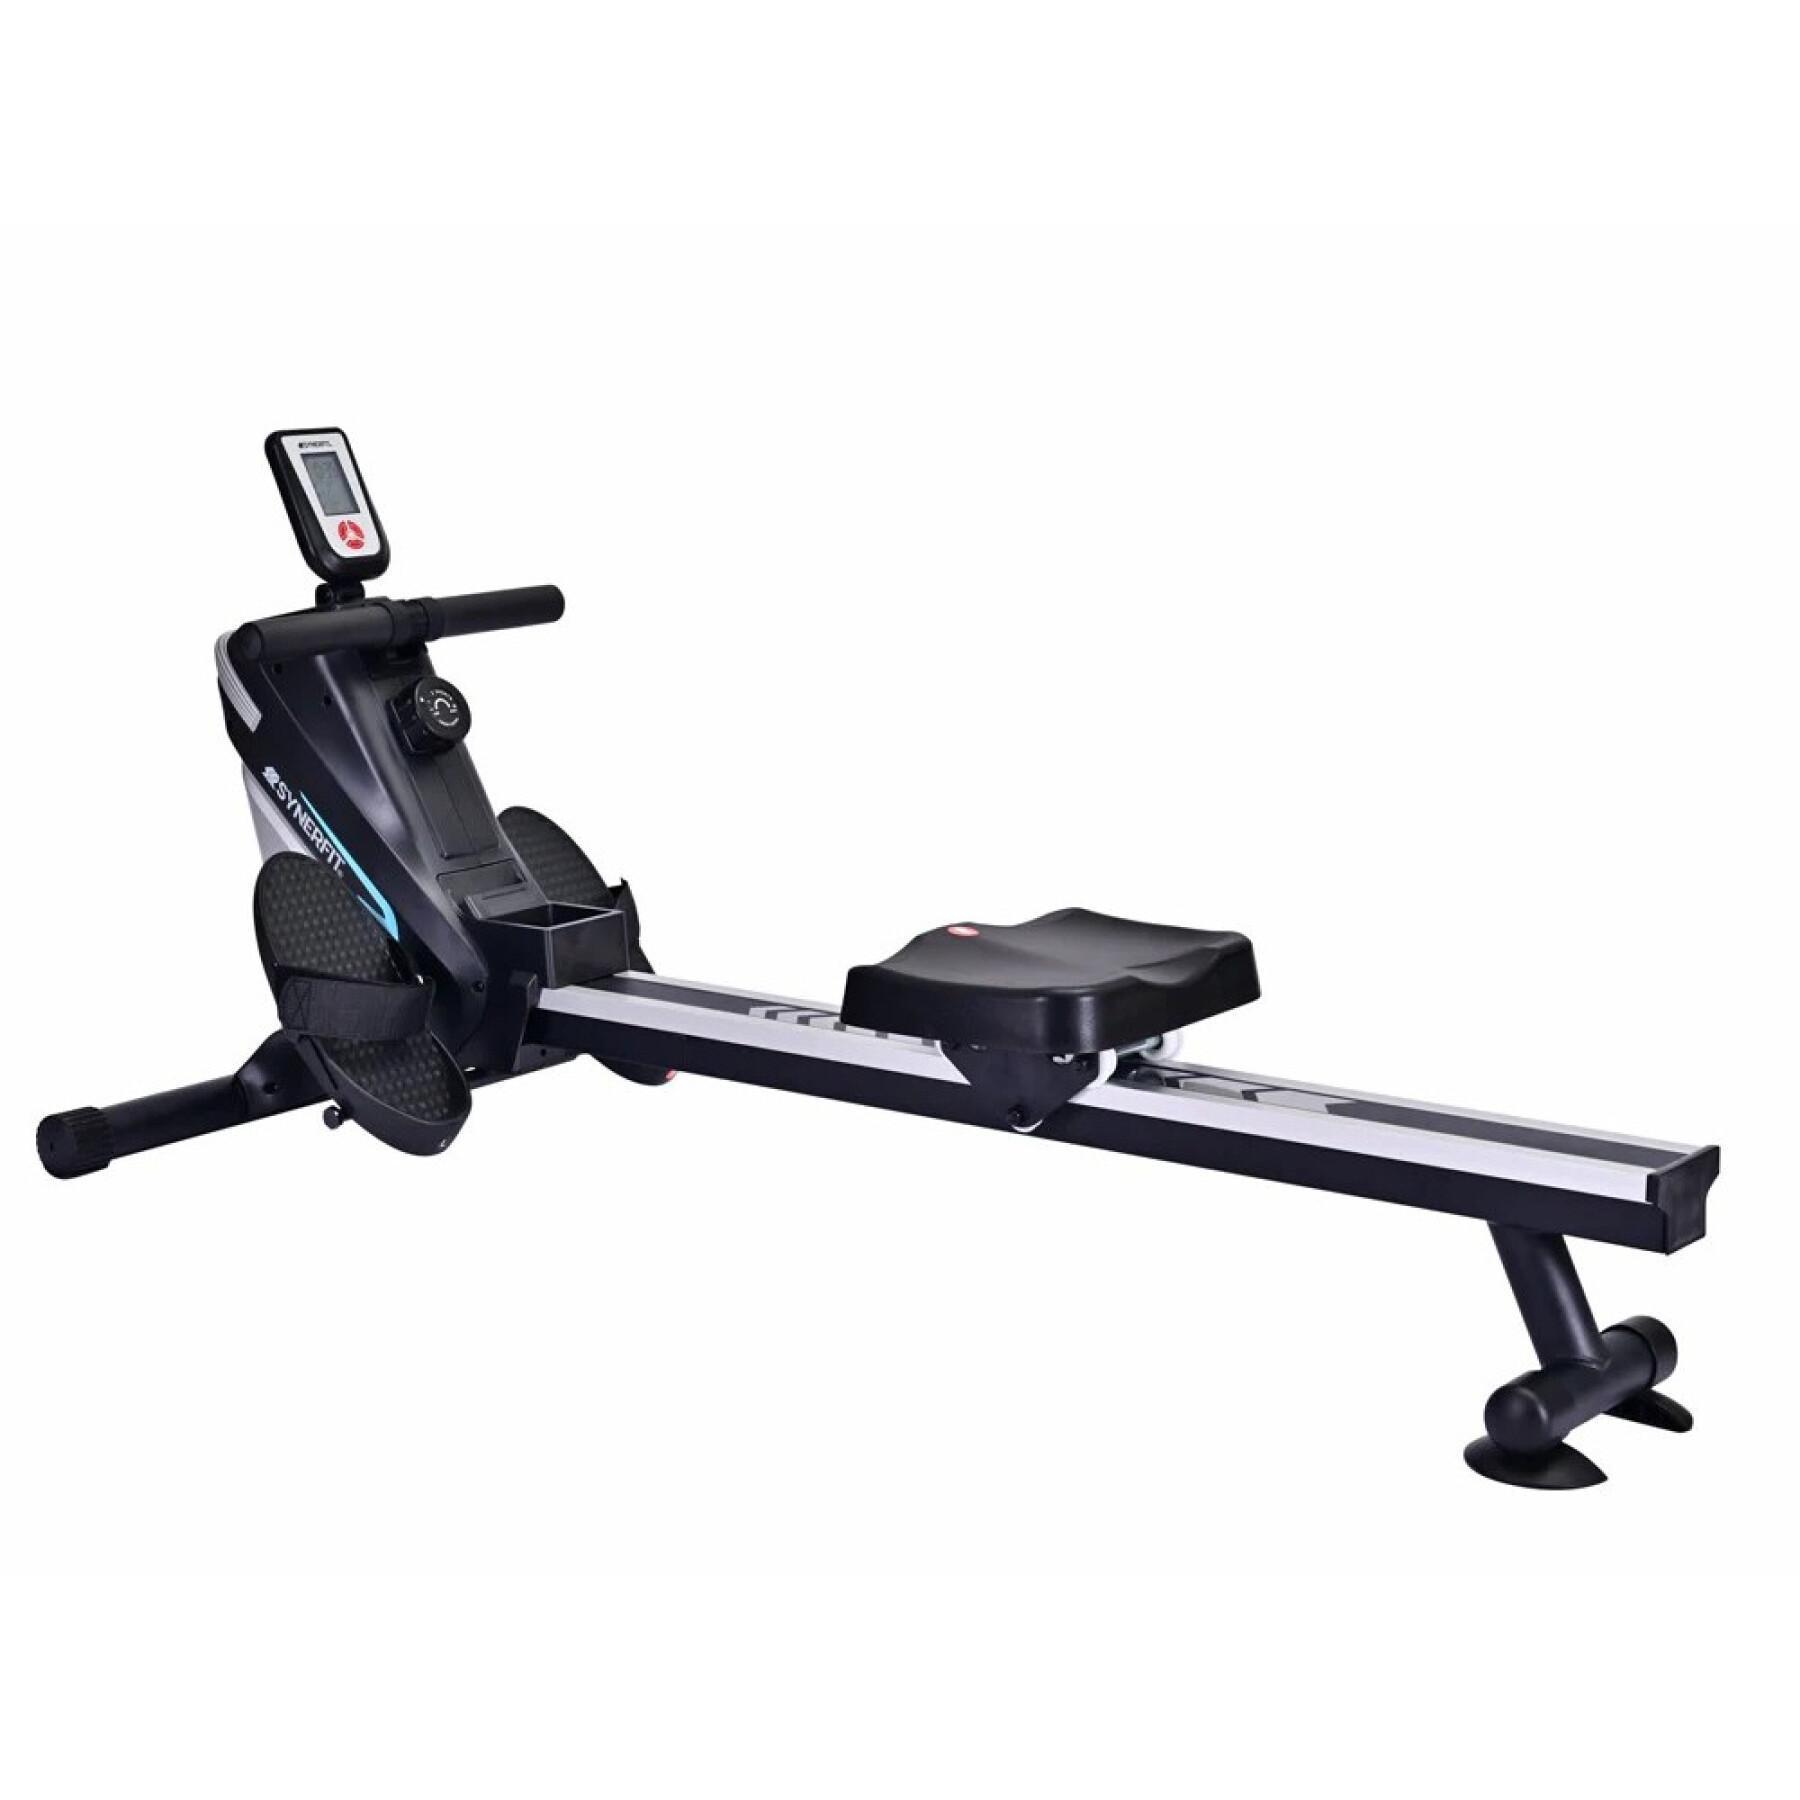 Vogatore a resistenza magnetica Synerfit Fitness Lima